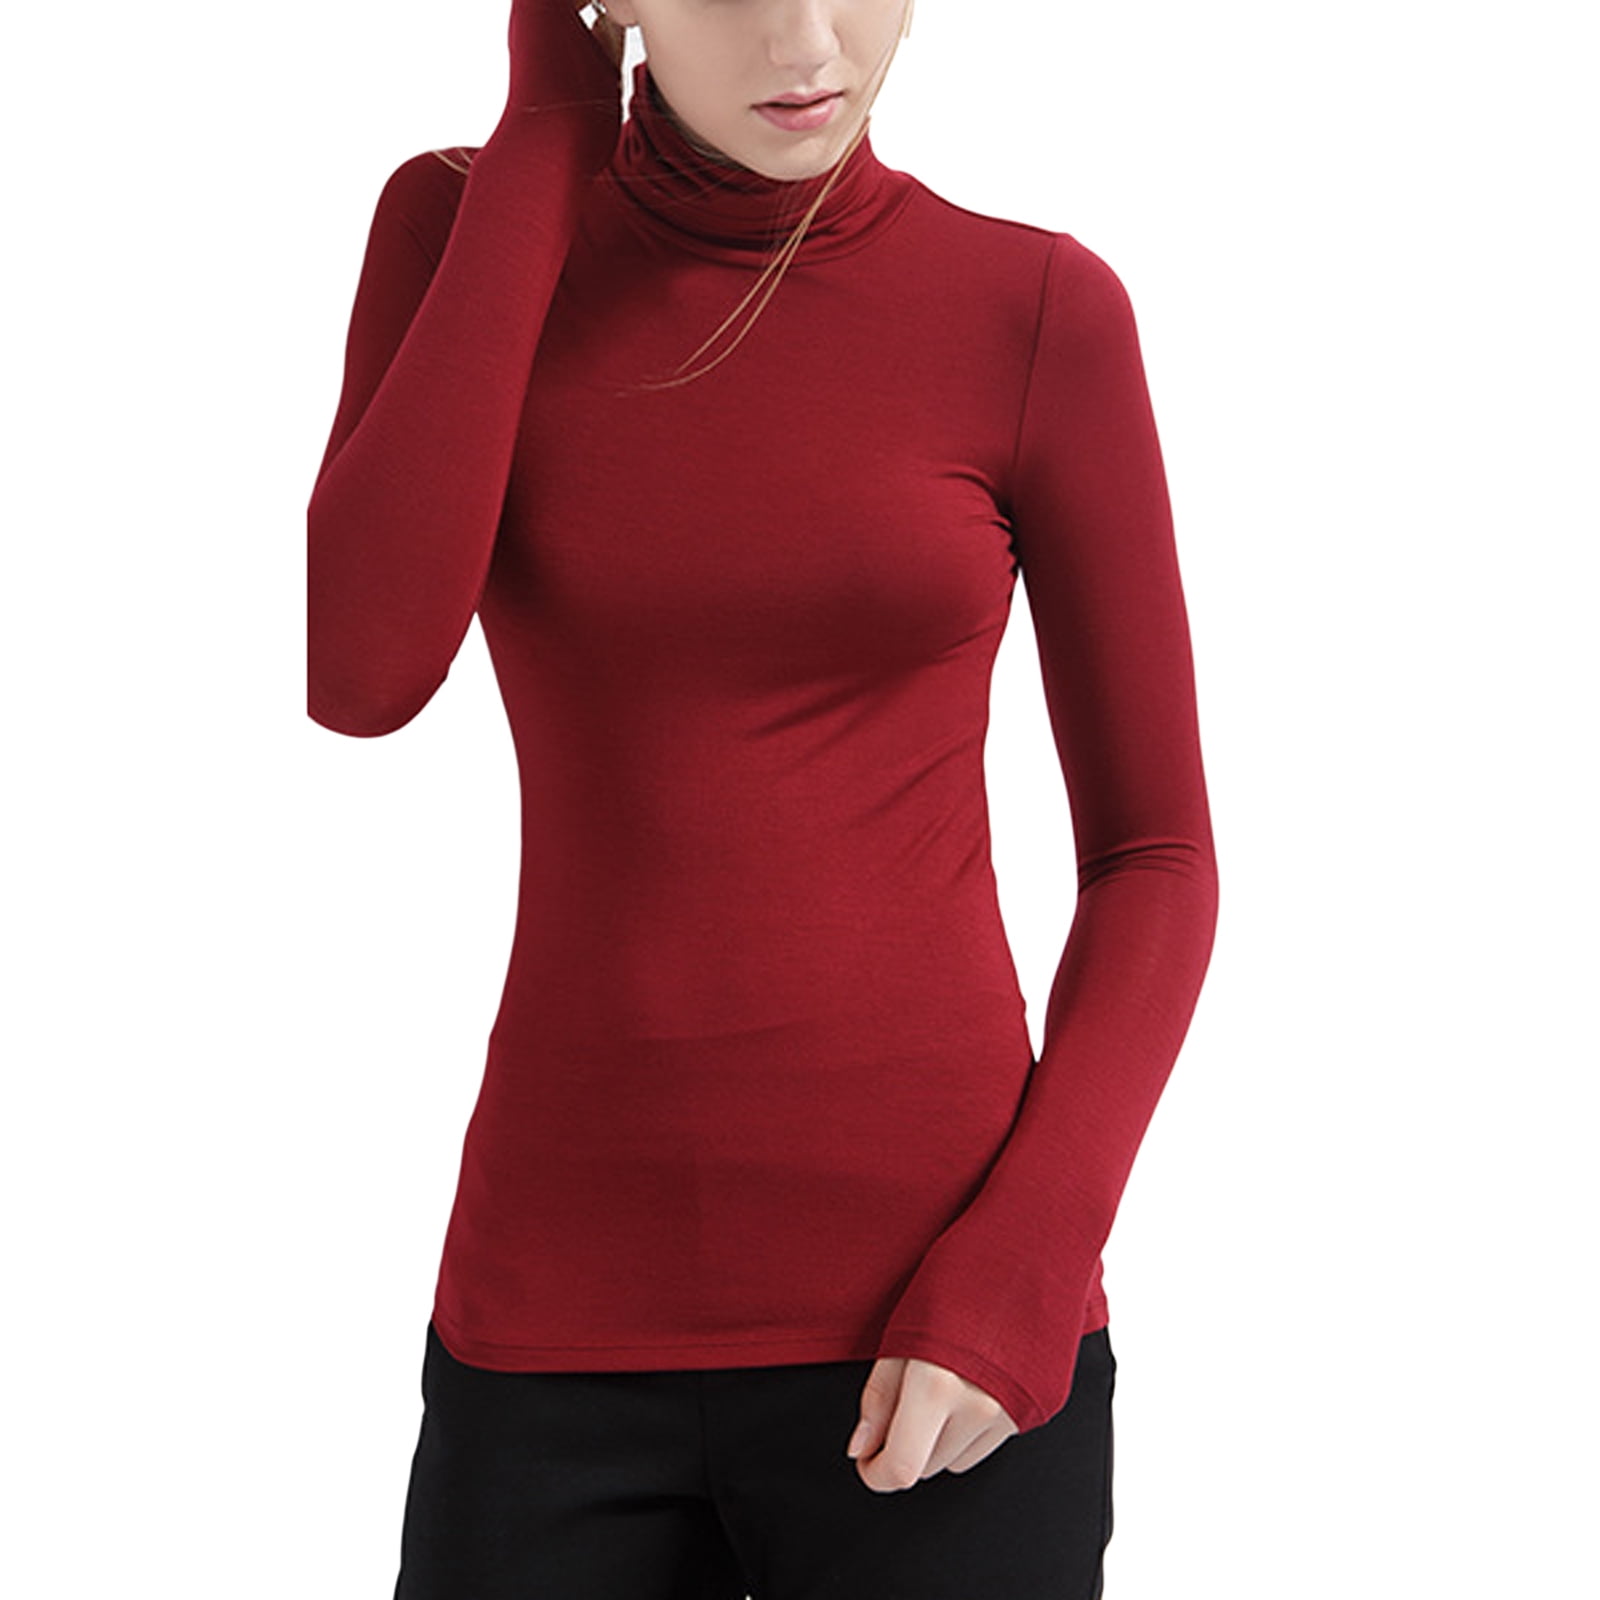 Musuos Women's Base Pullover, Long Sleeve Modal Turtleneck Tops Soft  Stretchy Slim Fitted Base Layer Shirts